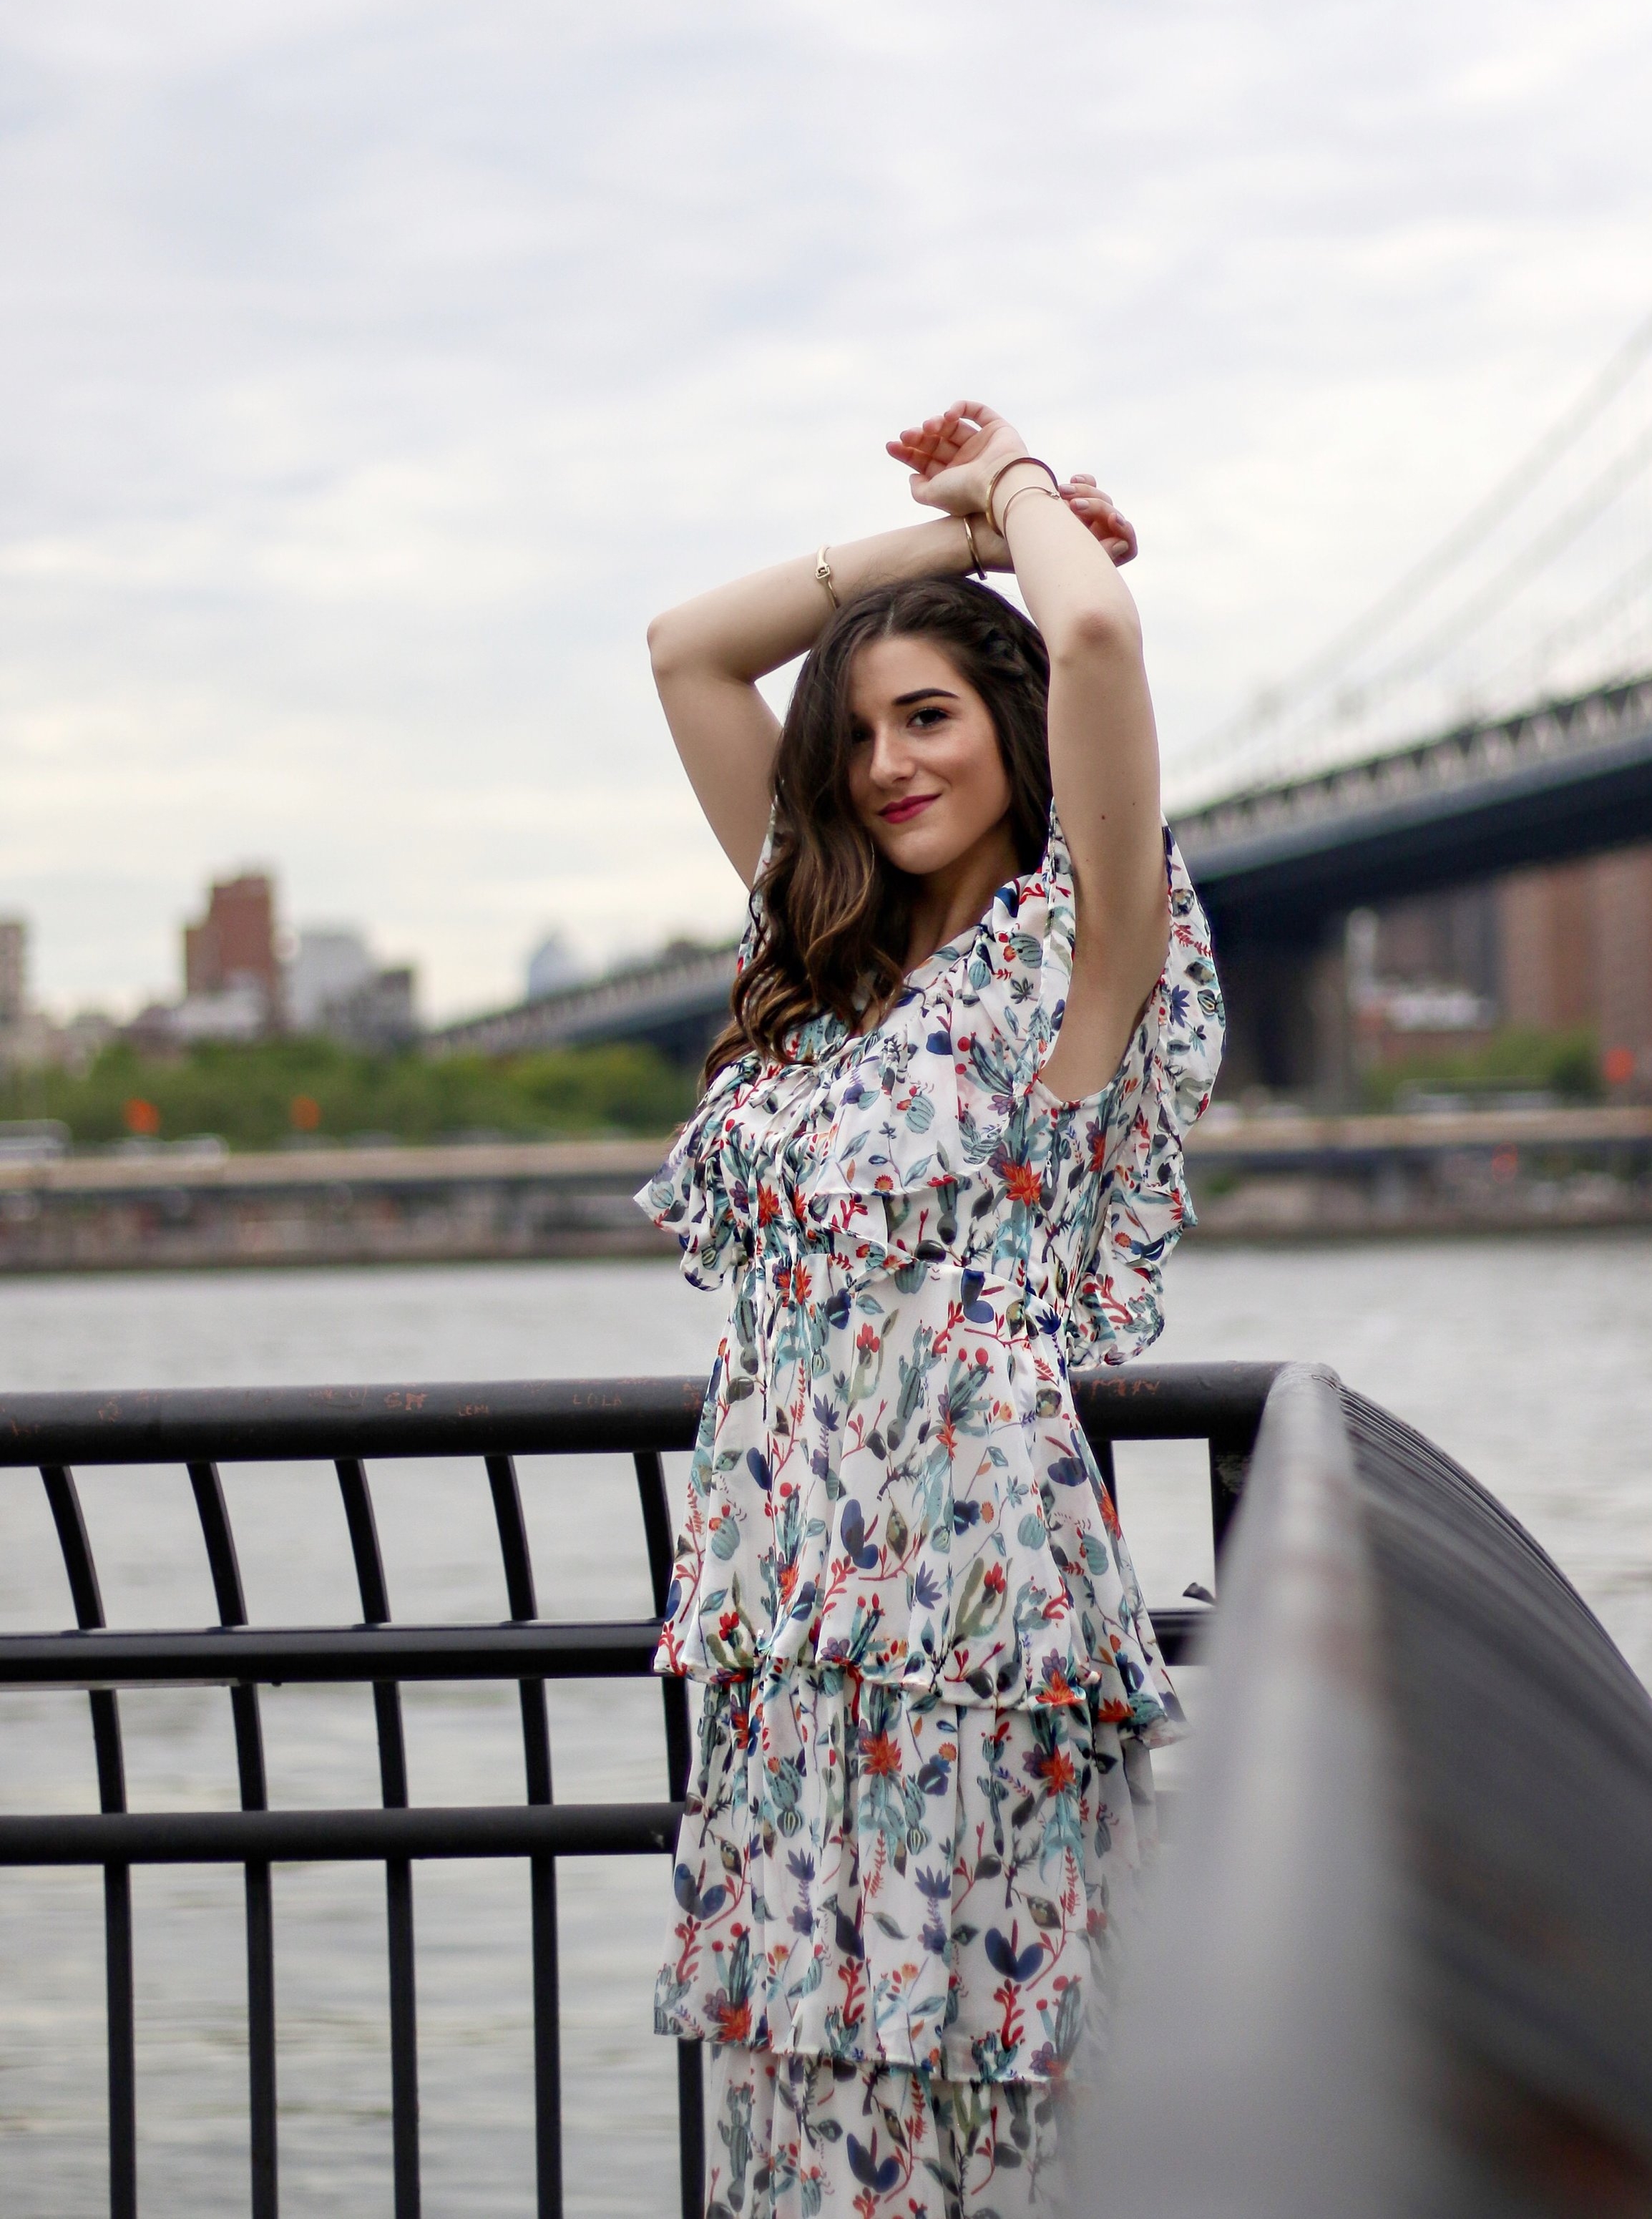 Ruffle Floral Maxi Dress Why You Should Trust Me Esther Santer Fashion Blog NYC Street Style Blogger Outfit OOTD Trendy Summer Outdoors Pretty Girly Photoshoot Feminine Beautiful Model Accessories Shop Women Sandals Wedges Shoes Gold Bracelets Jewelry.JPG